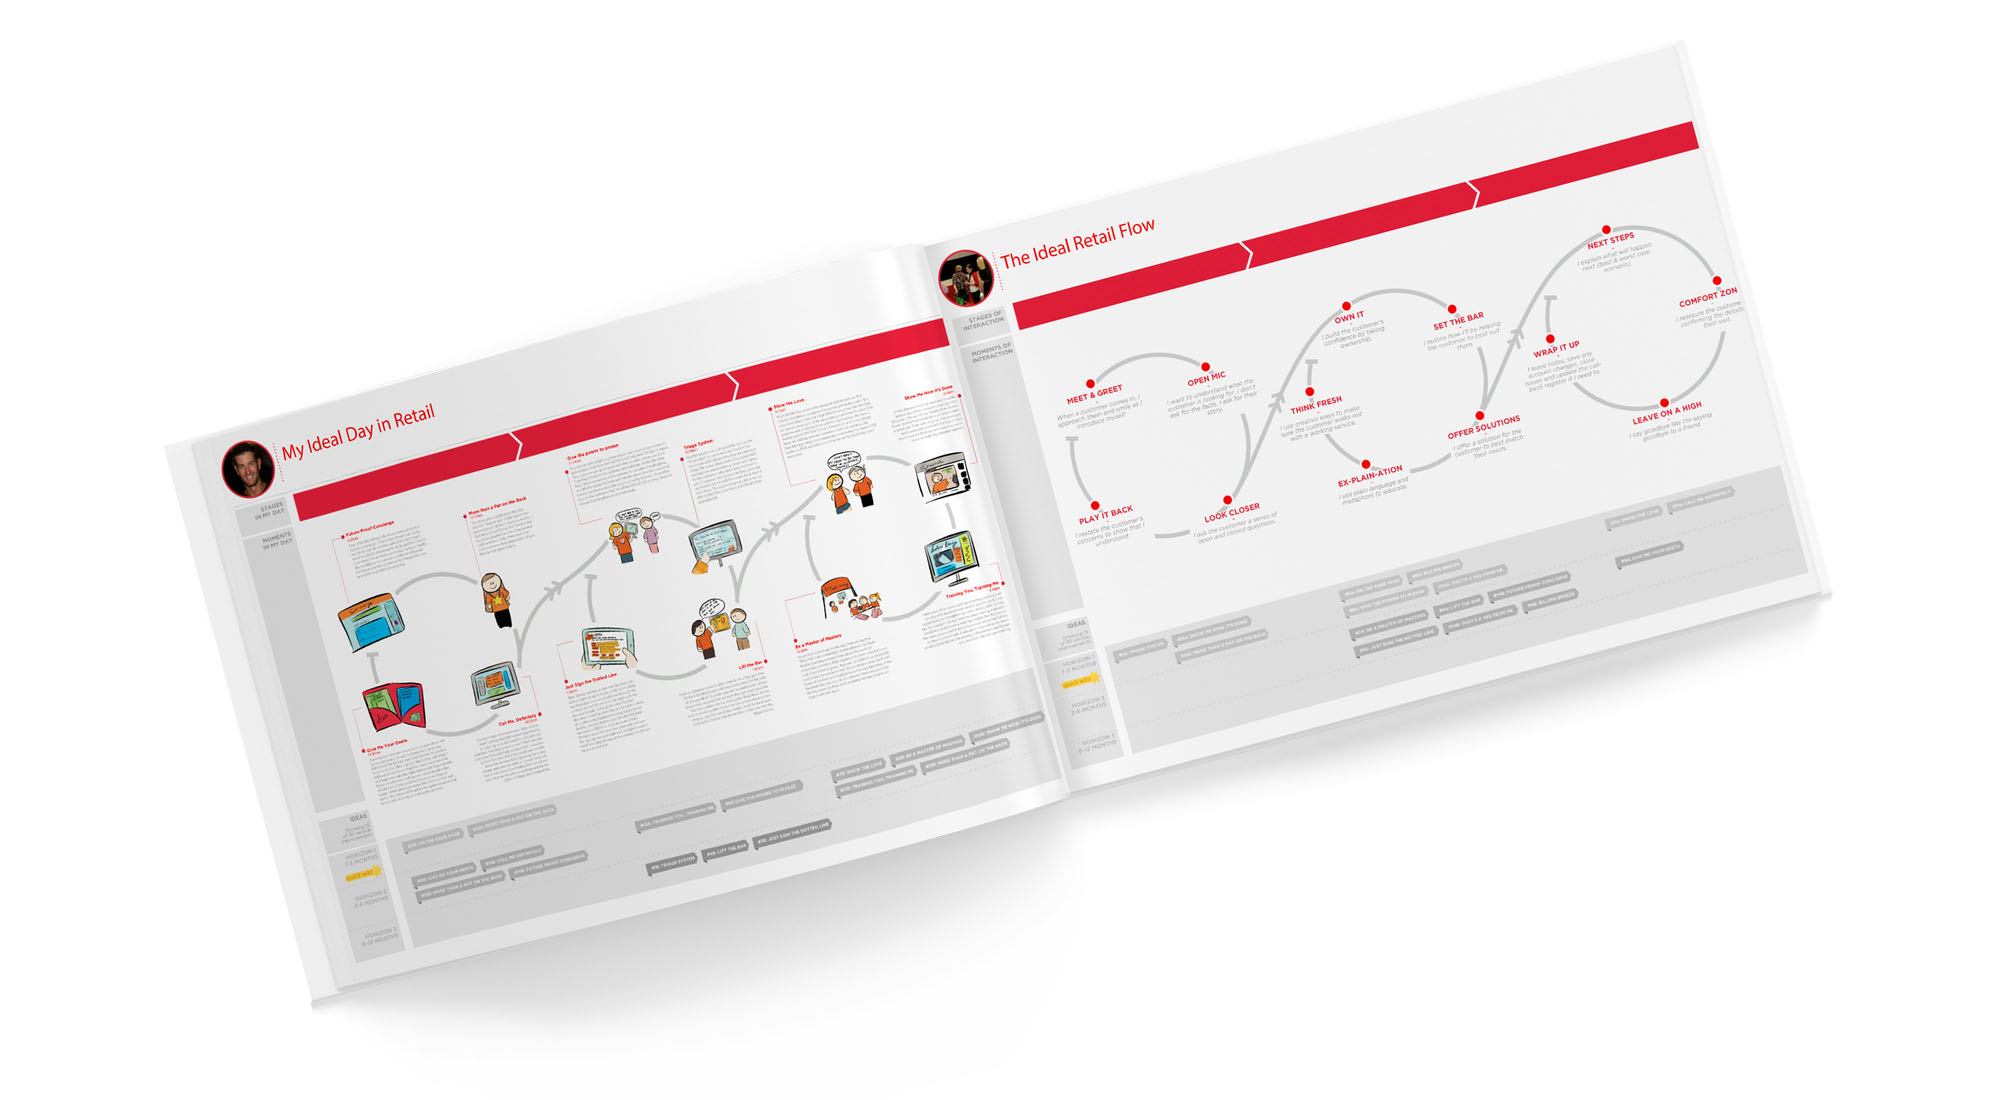 Virgin Mobile ideal day in retail customer journey map